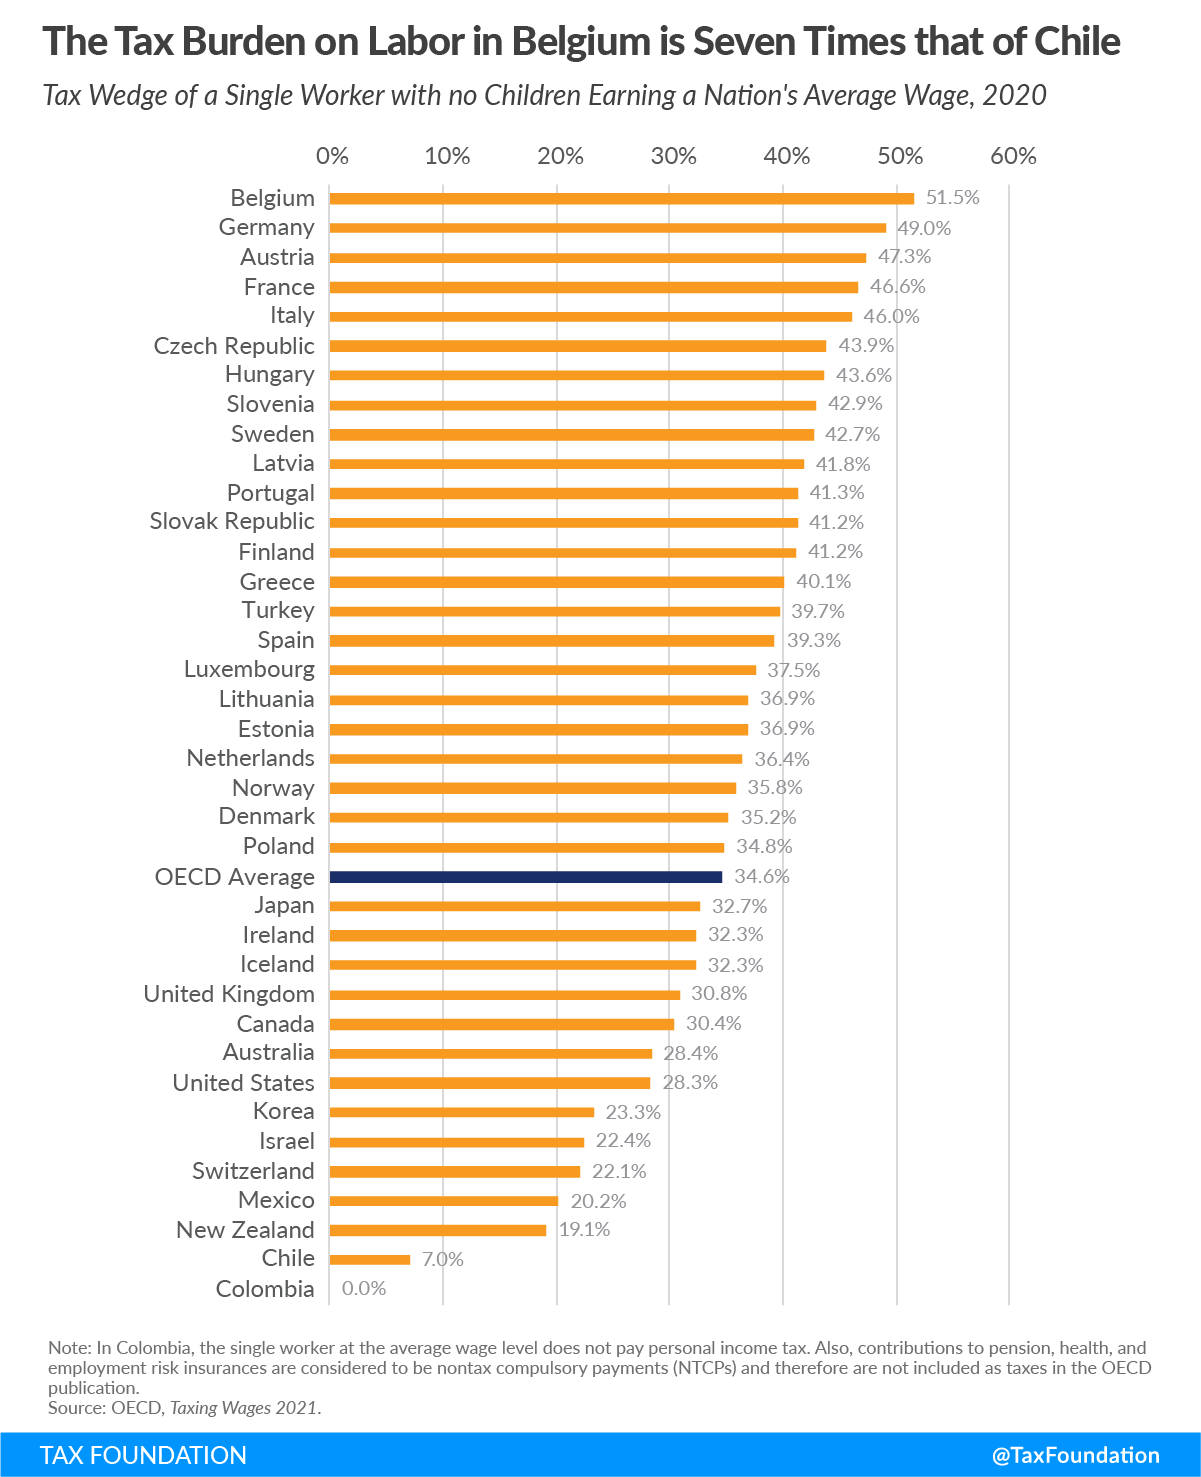 The-tax-burden-on-labor-in-Belgium-is-seven-times-that-of-Child-OECD-tax-burden-tax-wedge-with-single-worker-with-no-children-earning-a-nations-average-wage.png